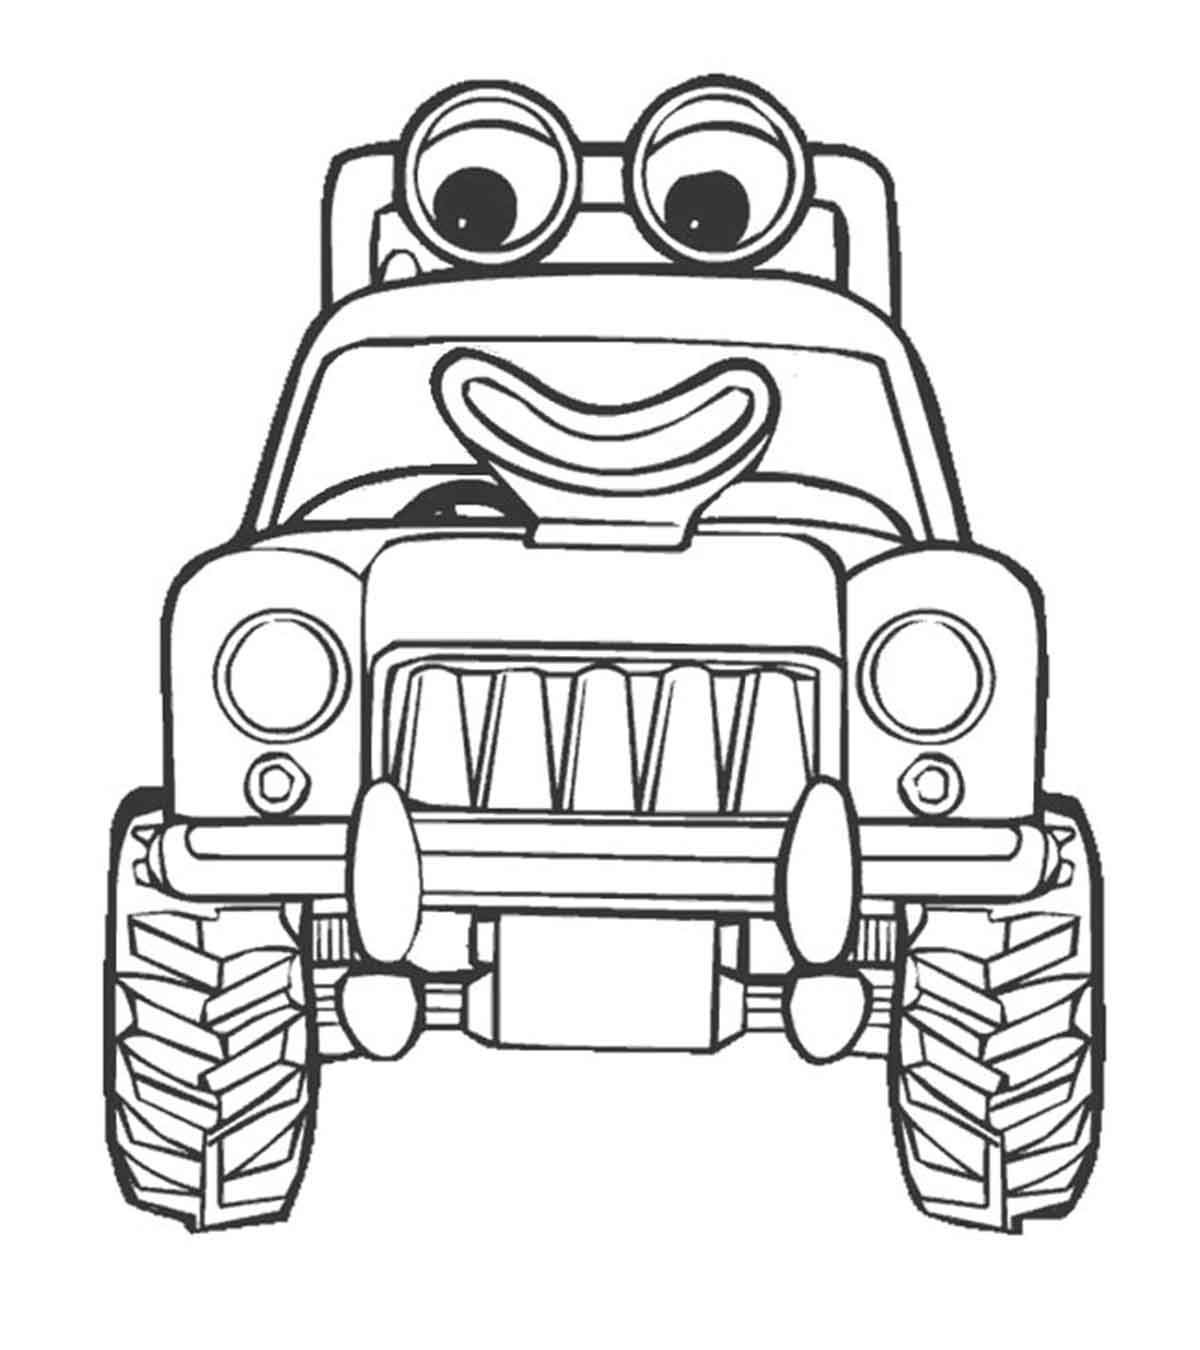 Farm Coloring Pages - MomJunction